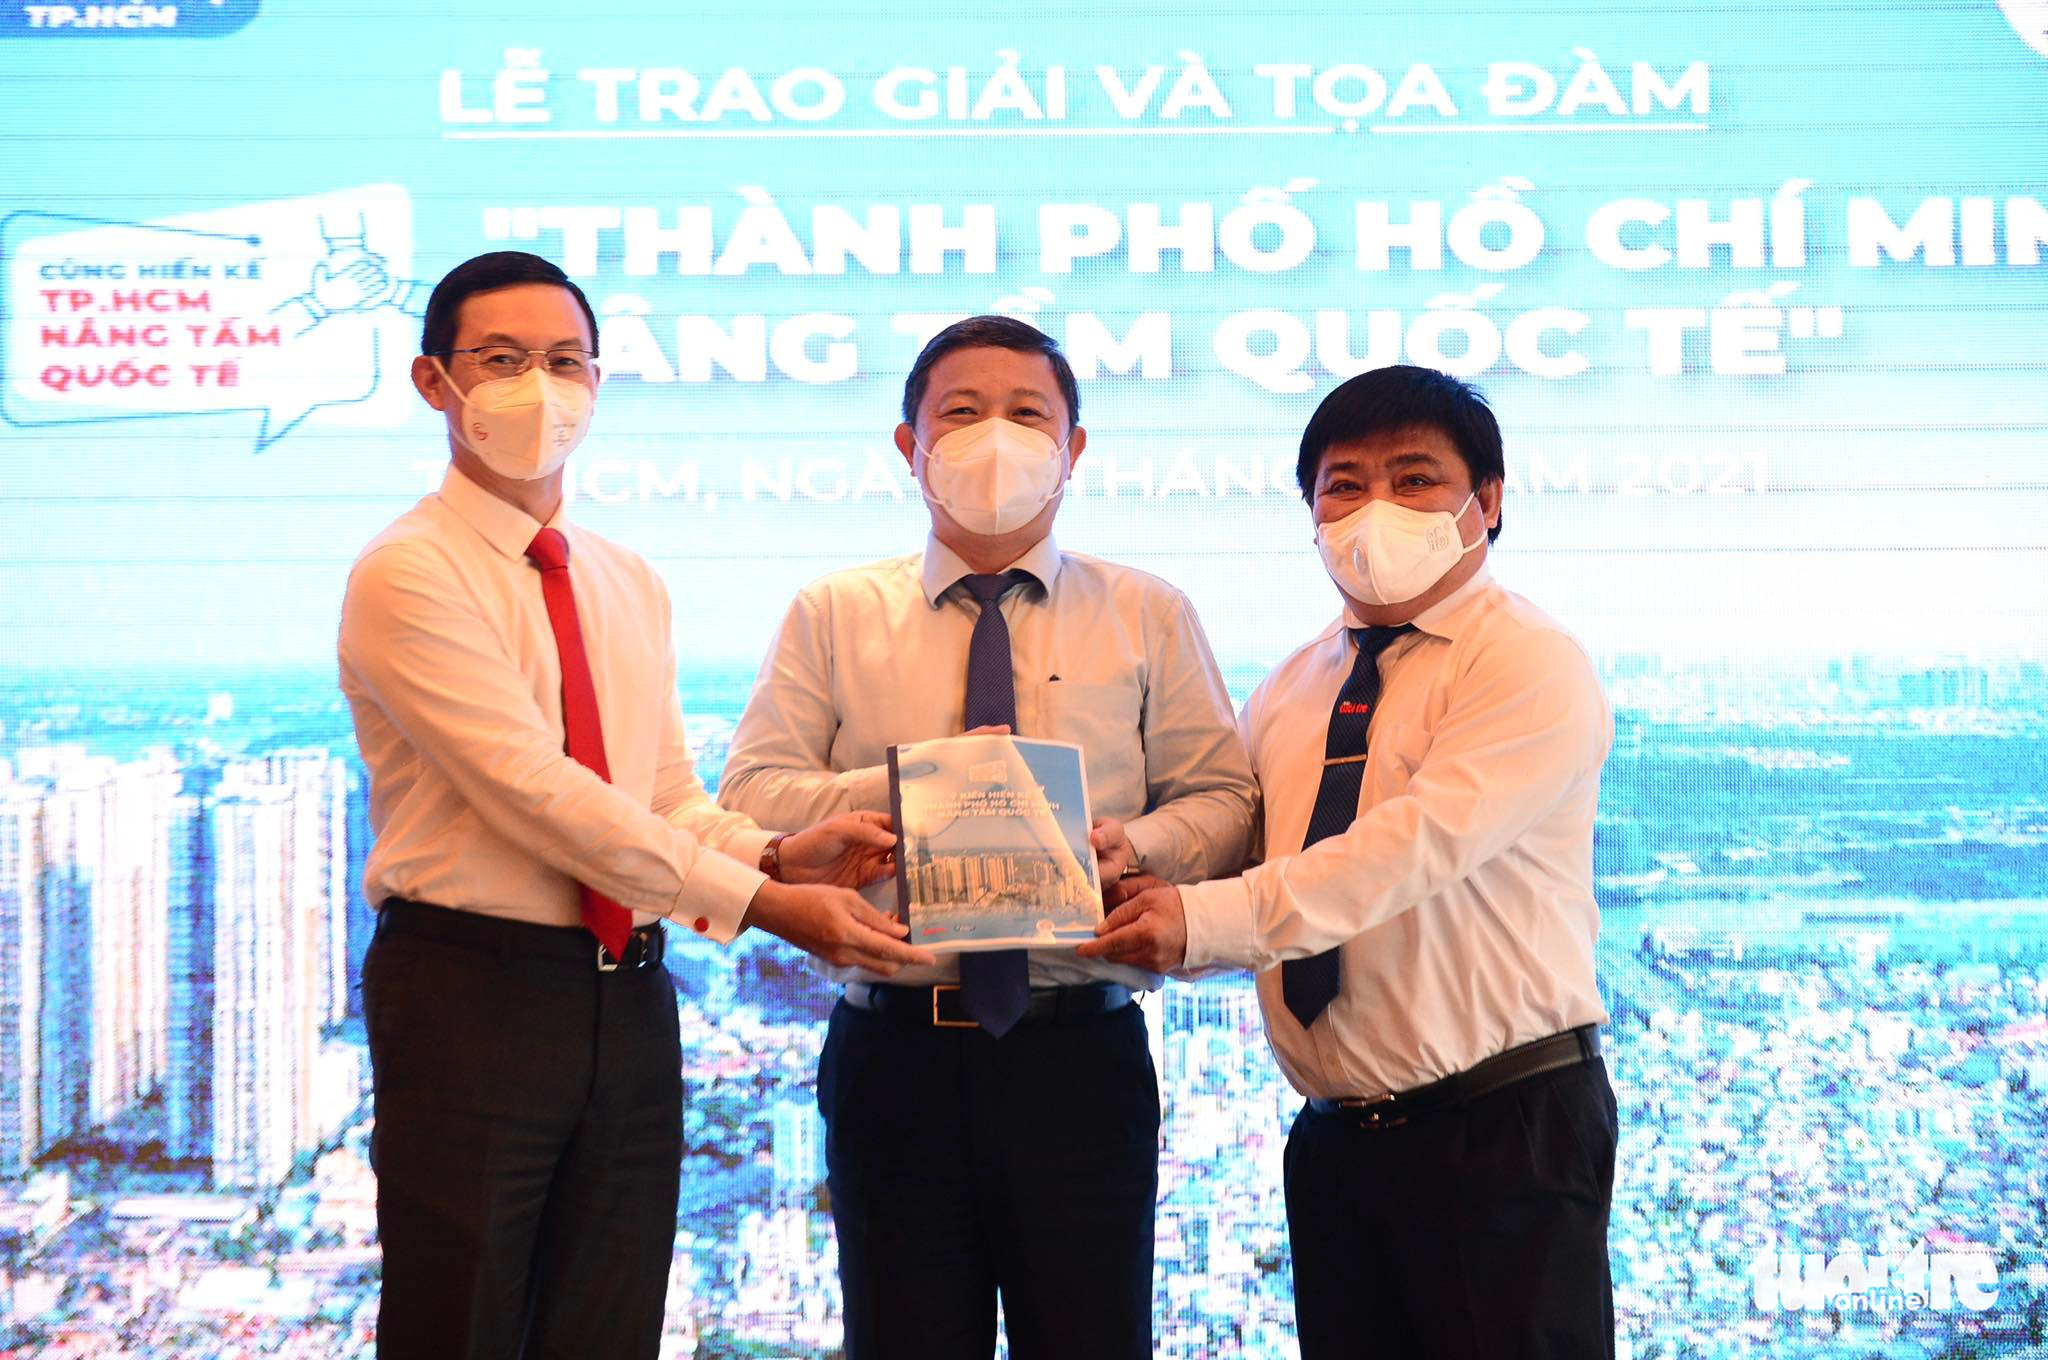 Vice-chairman of the Ho Chi Minh City People’s Committee Duong Anh Duc (C) receives the compilation of winning entries of the ‘Ho Chi Minh City Goes Global’ contest from Tuoi Tre Editor-in-Chief Le The Chu (R) and director of the Department of Foreign Affairs Tran Phuoc Anh (L). Photo: Quang Dinh / Tuoi Tre